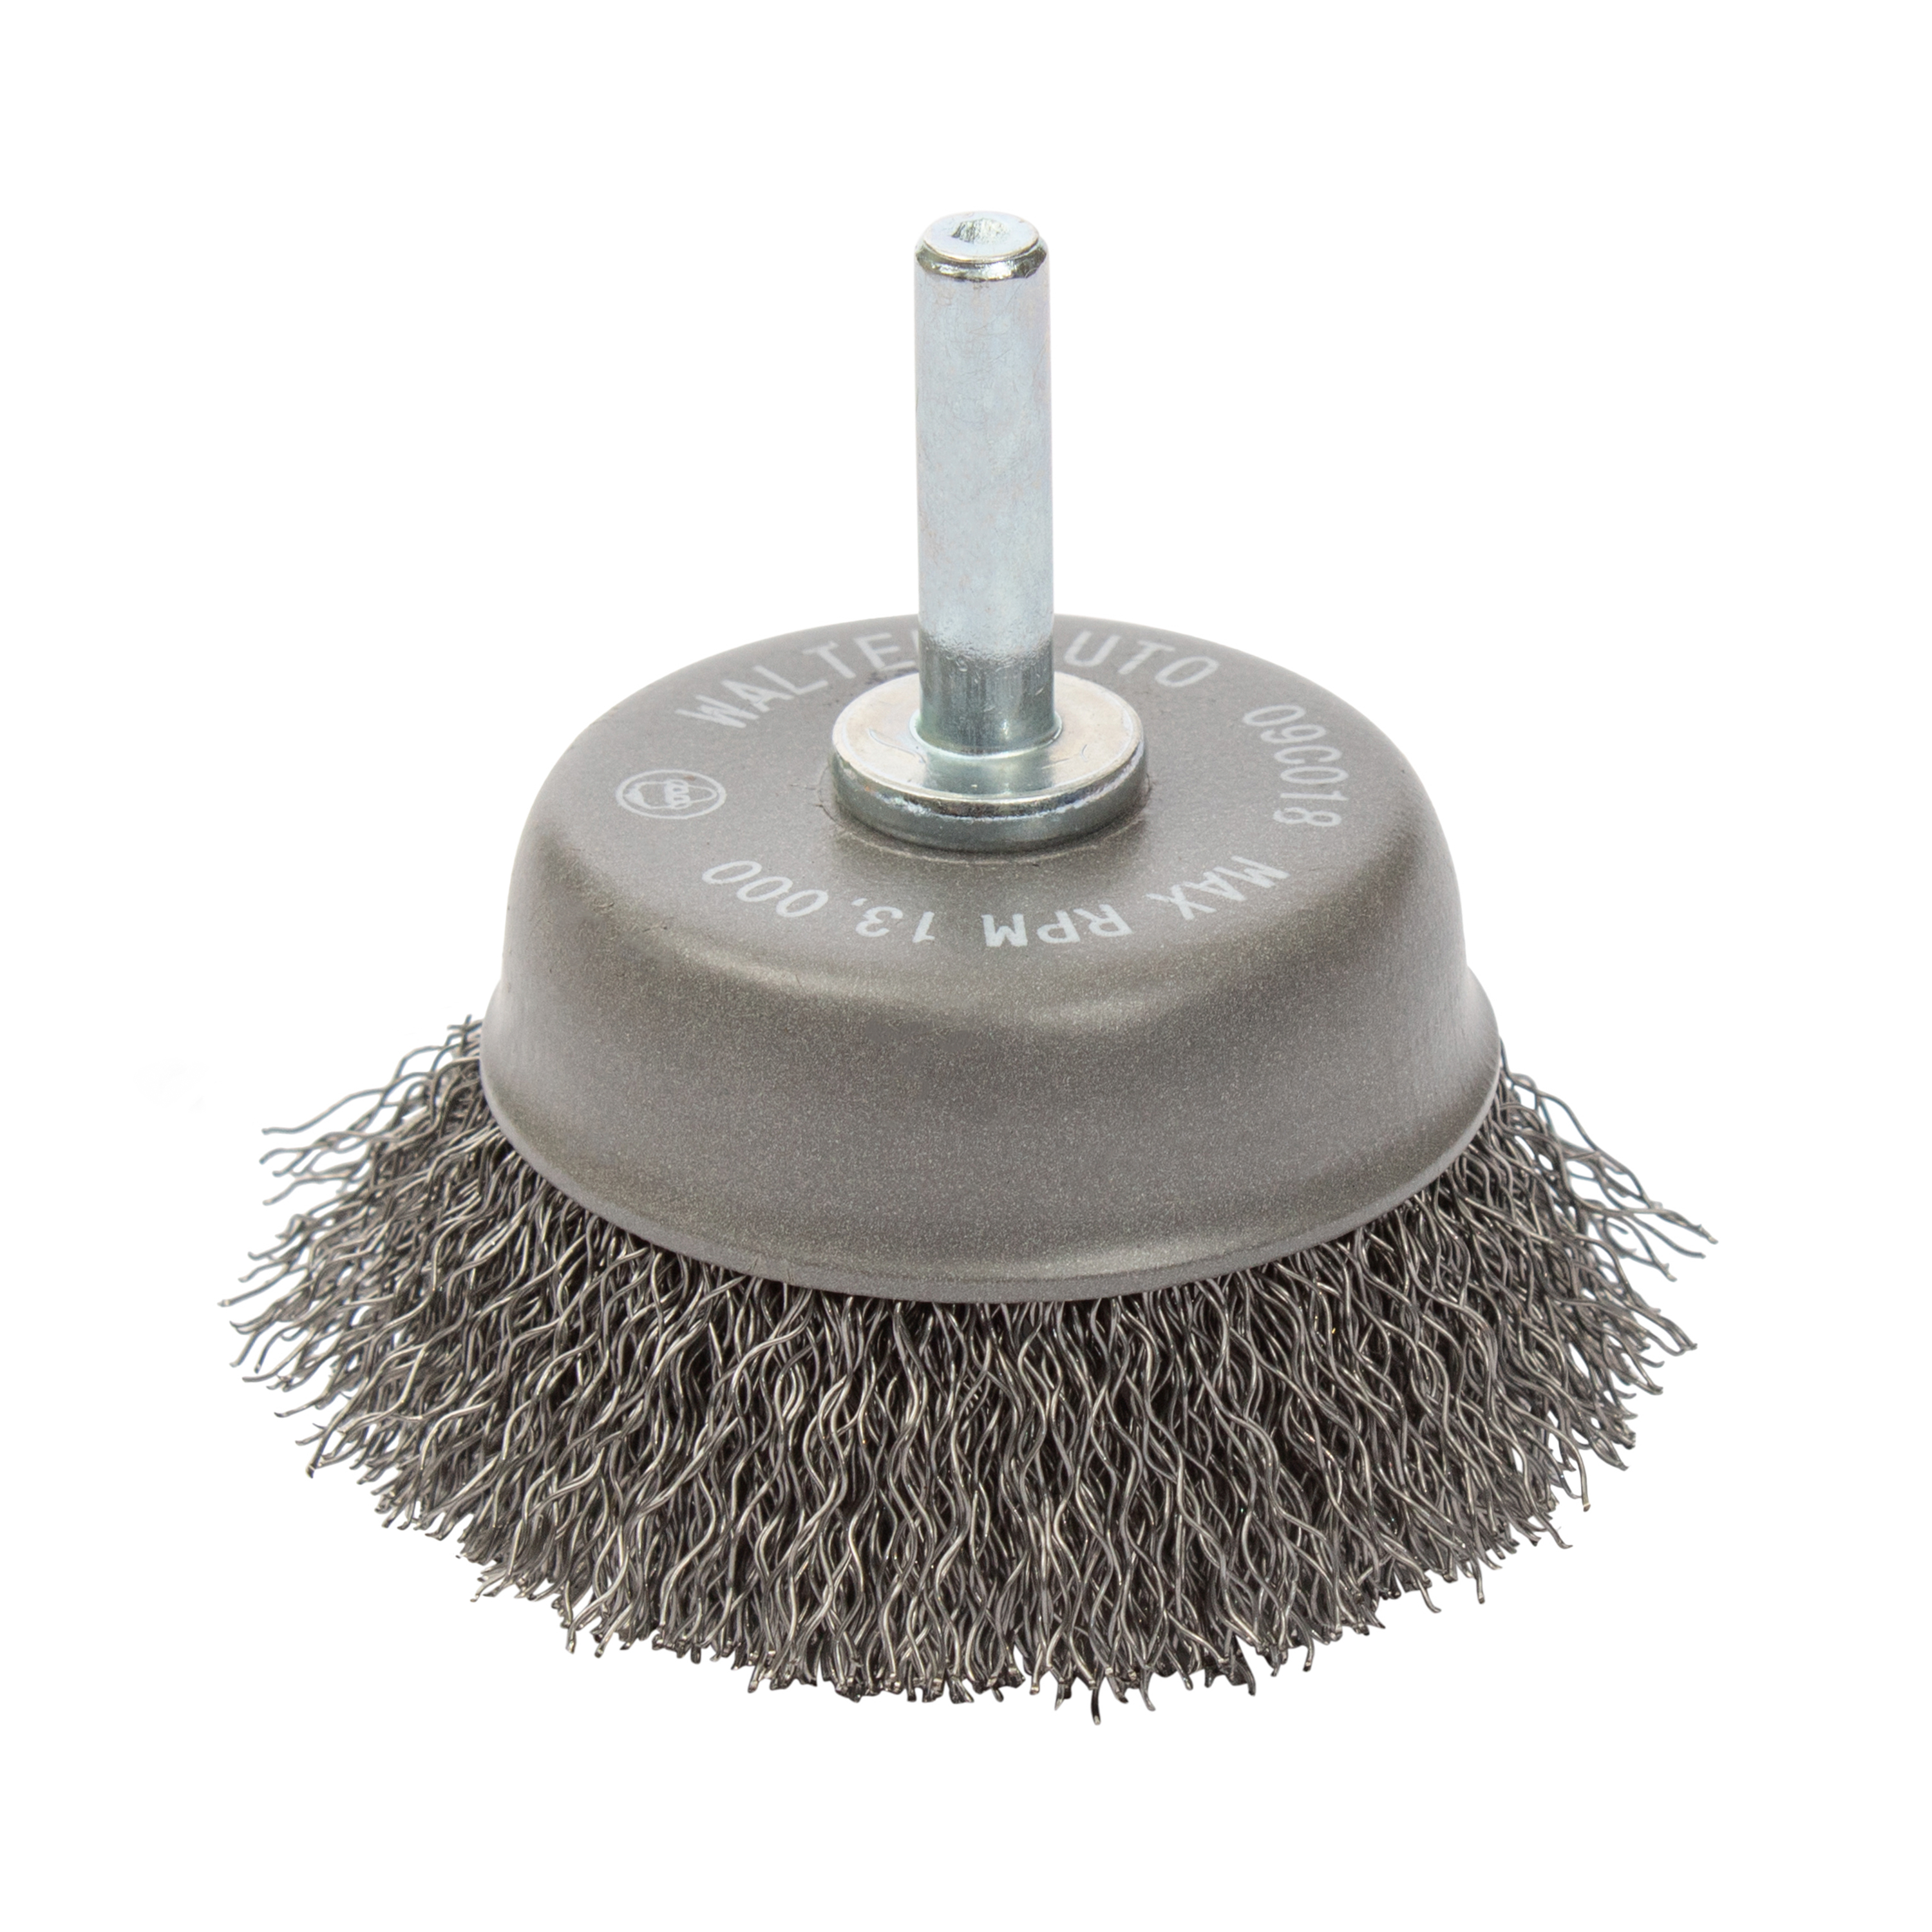 2-3/8 MOUNTED CUP BRUSH - Walter AUTO